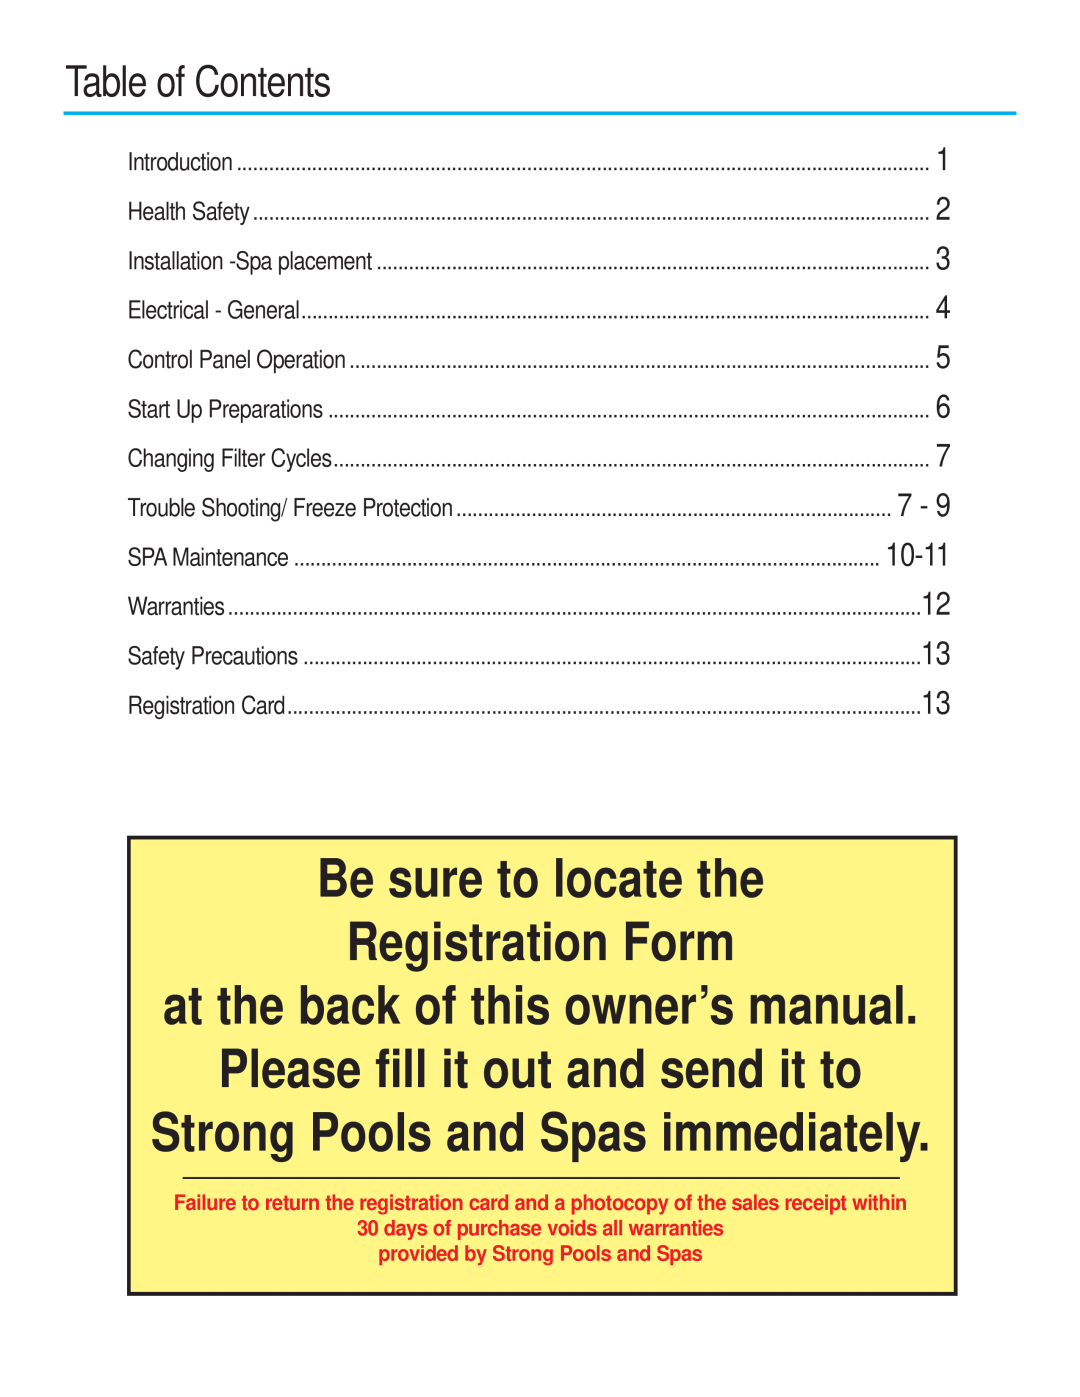 Strong Pools and Spas Madrid Table of Contents, Be sure to locate the Registration Form, Please fill it out and send it to 